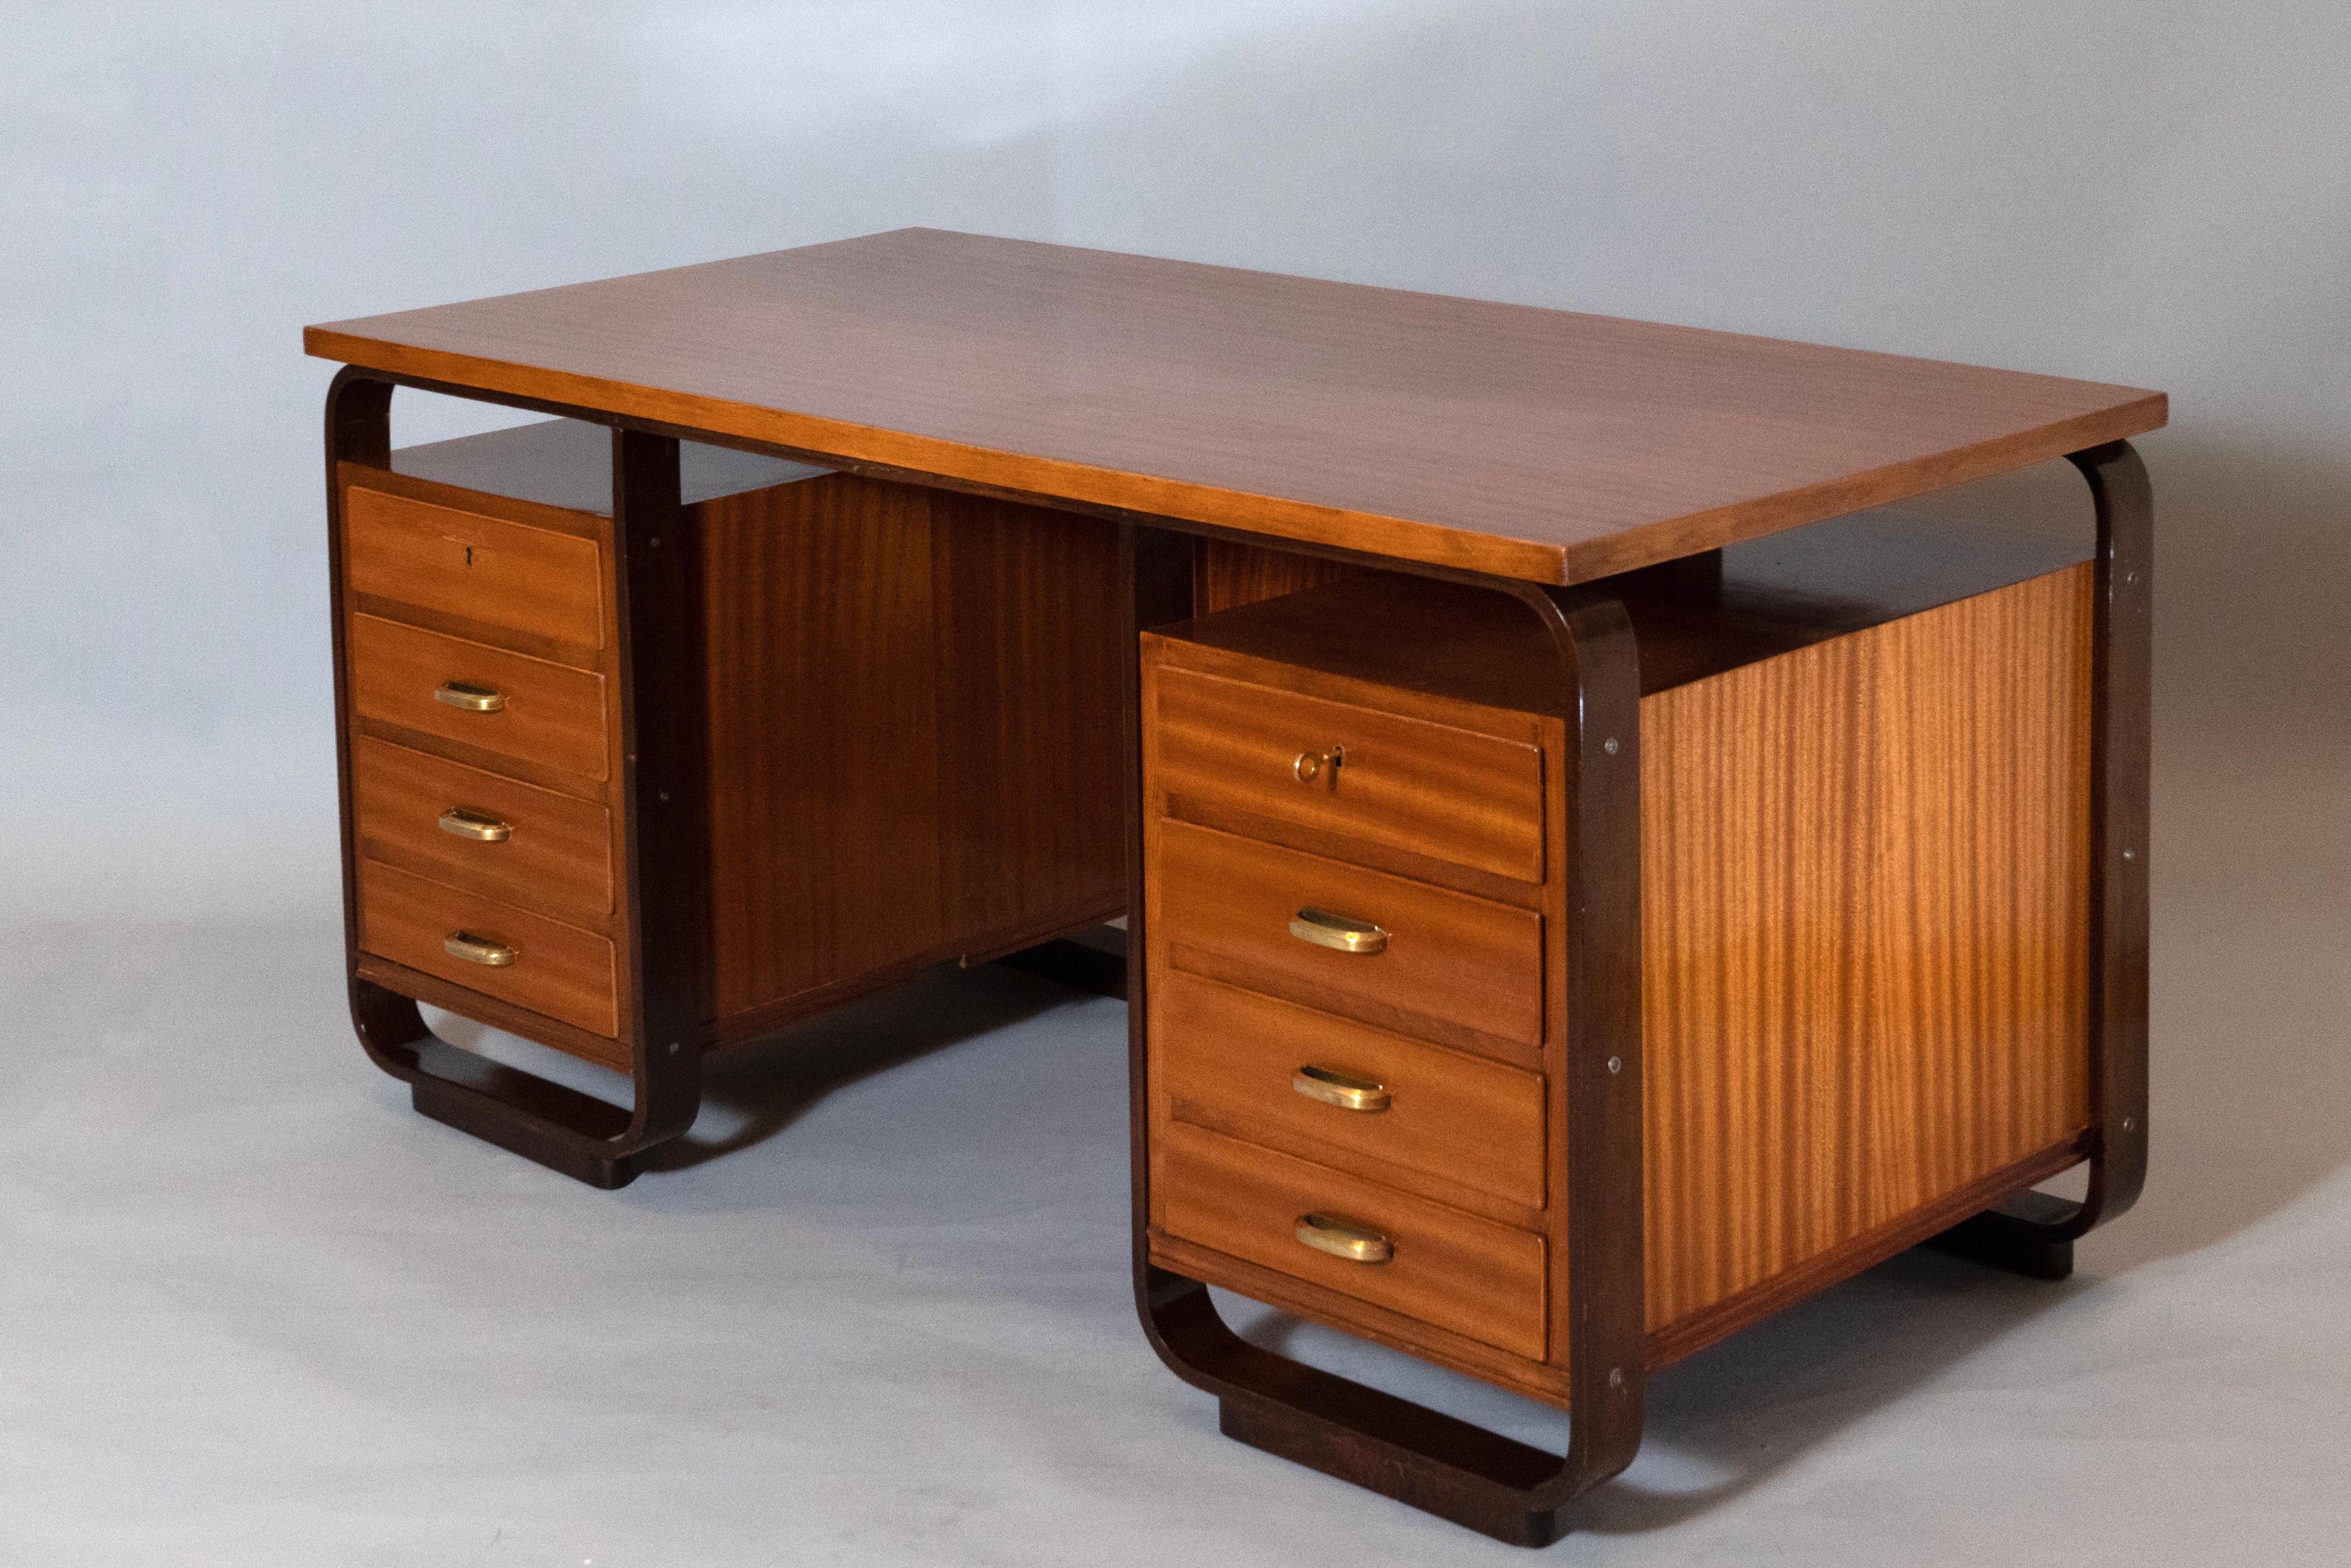 Mid-20th Century Giuseppe Pagano: Eight Drawer Desk in Fruitwood and Brass, Italy 1940 For Sale